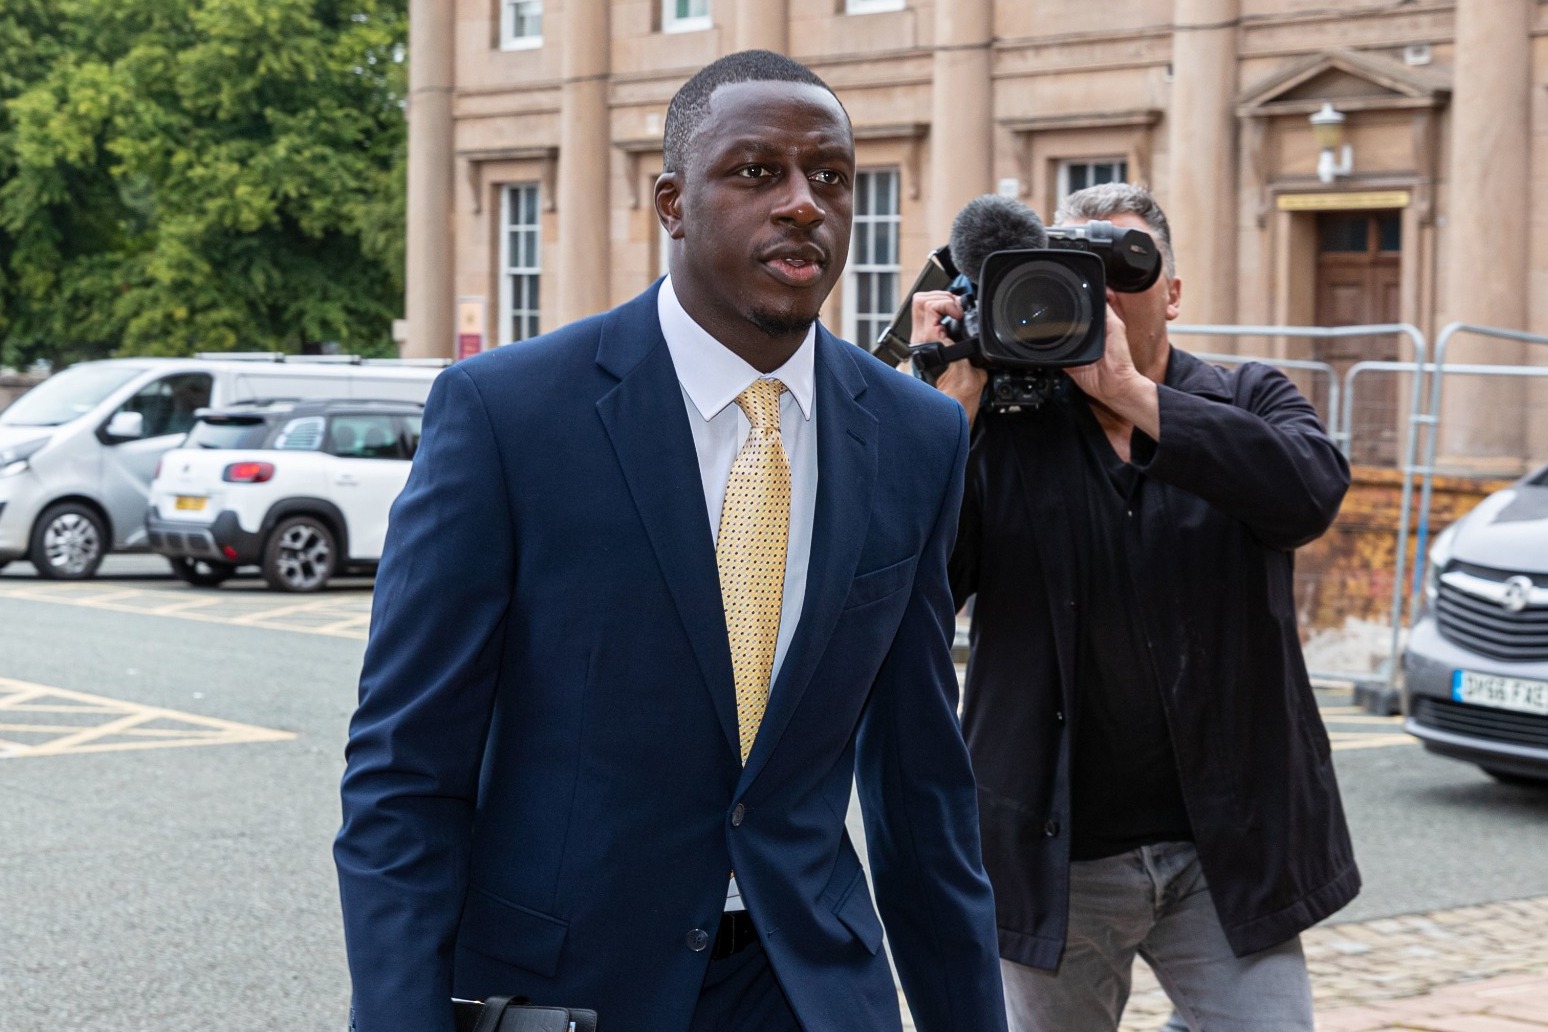 Benjamin Mendy told accuser ‘I have had sex with 10,000 women’, court hears 